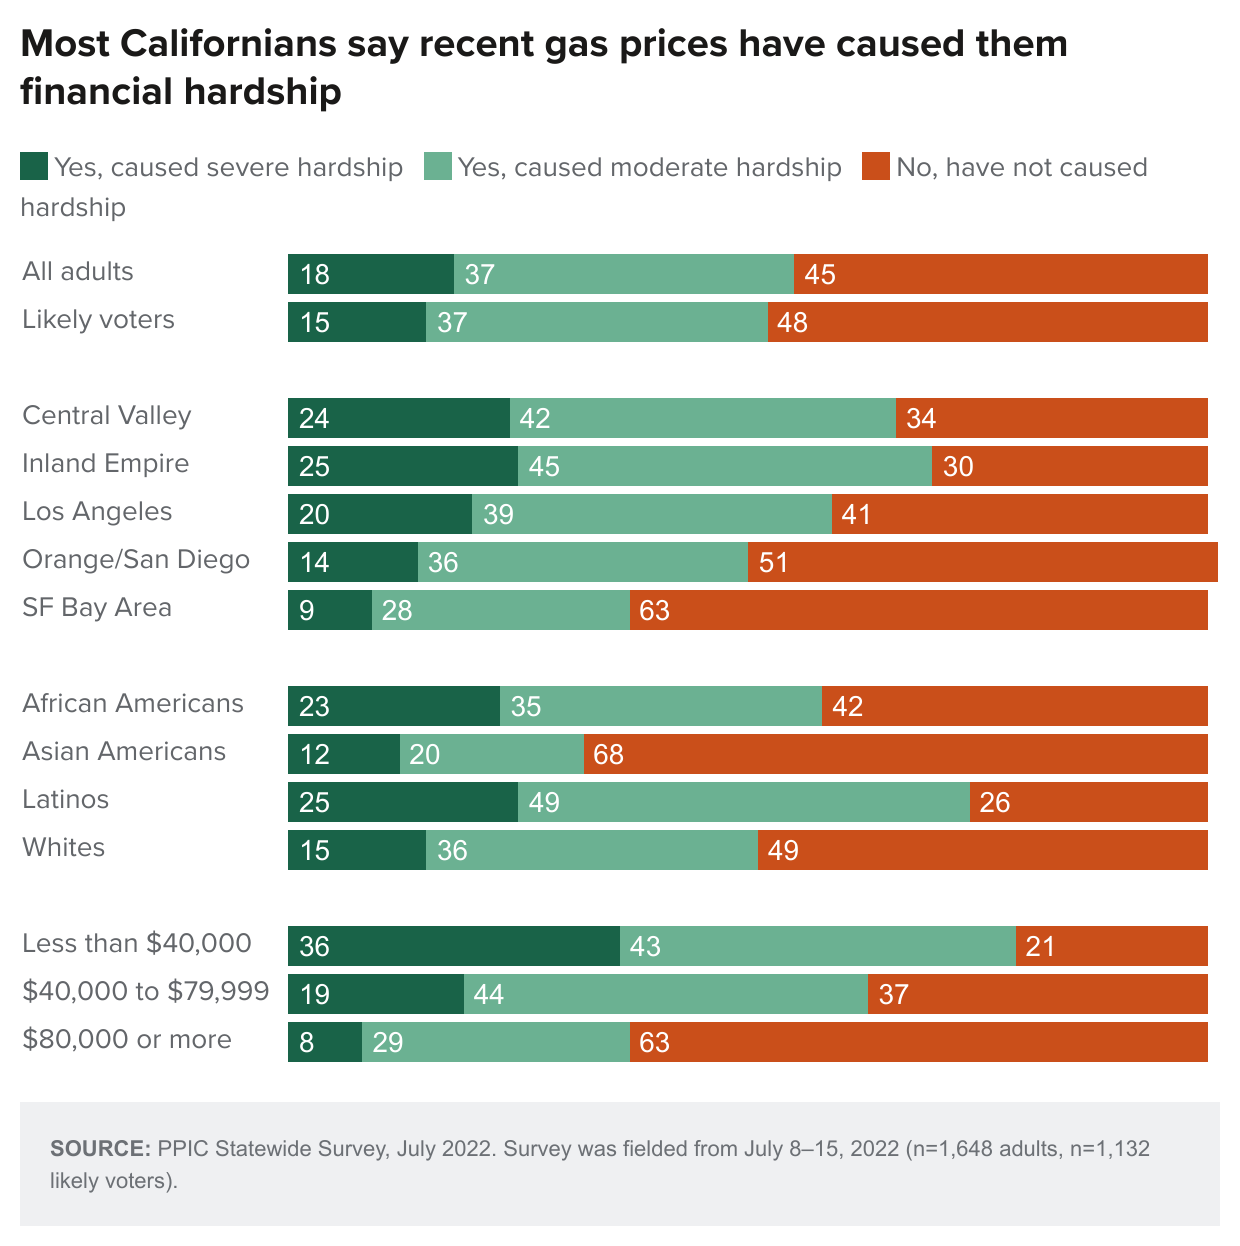 figure - Most Californians say recent gas prices have caused them financial hardship